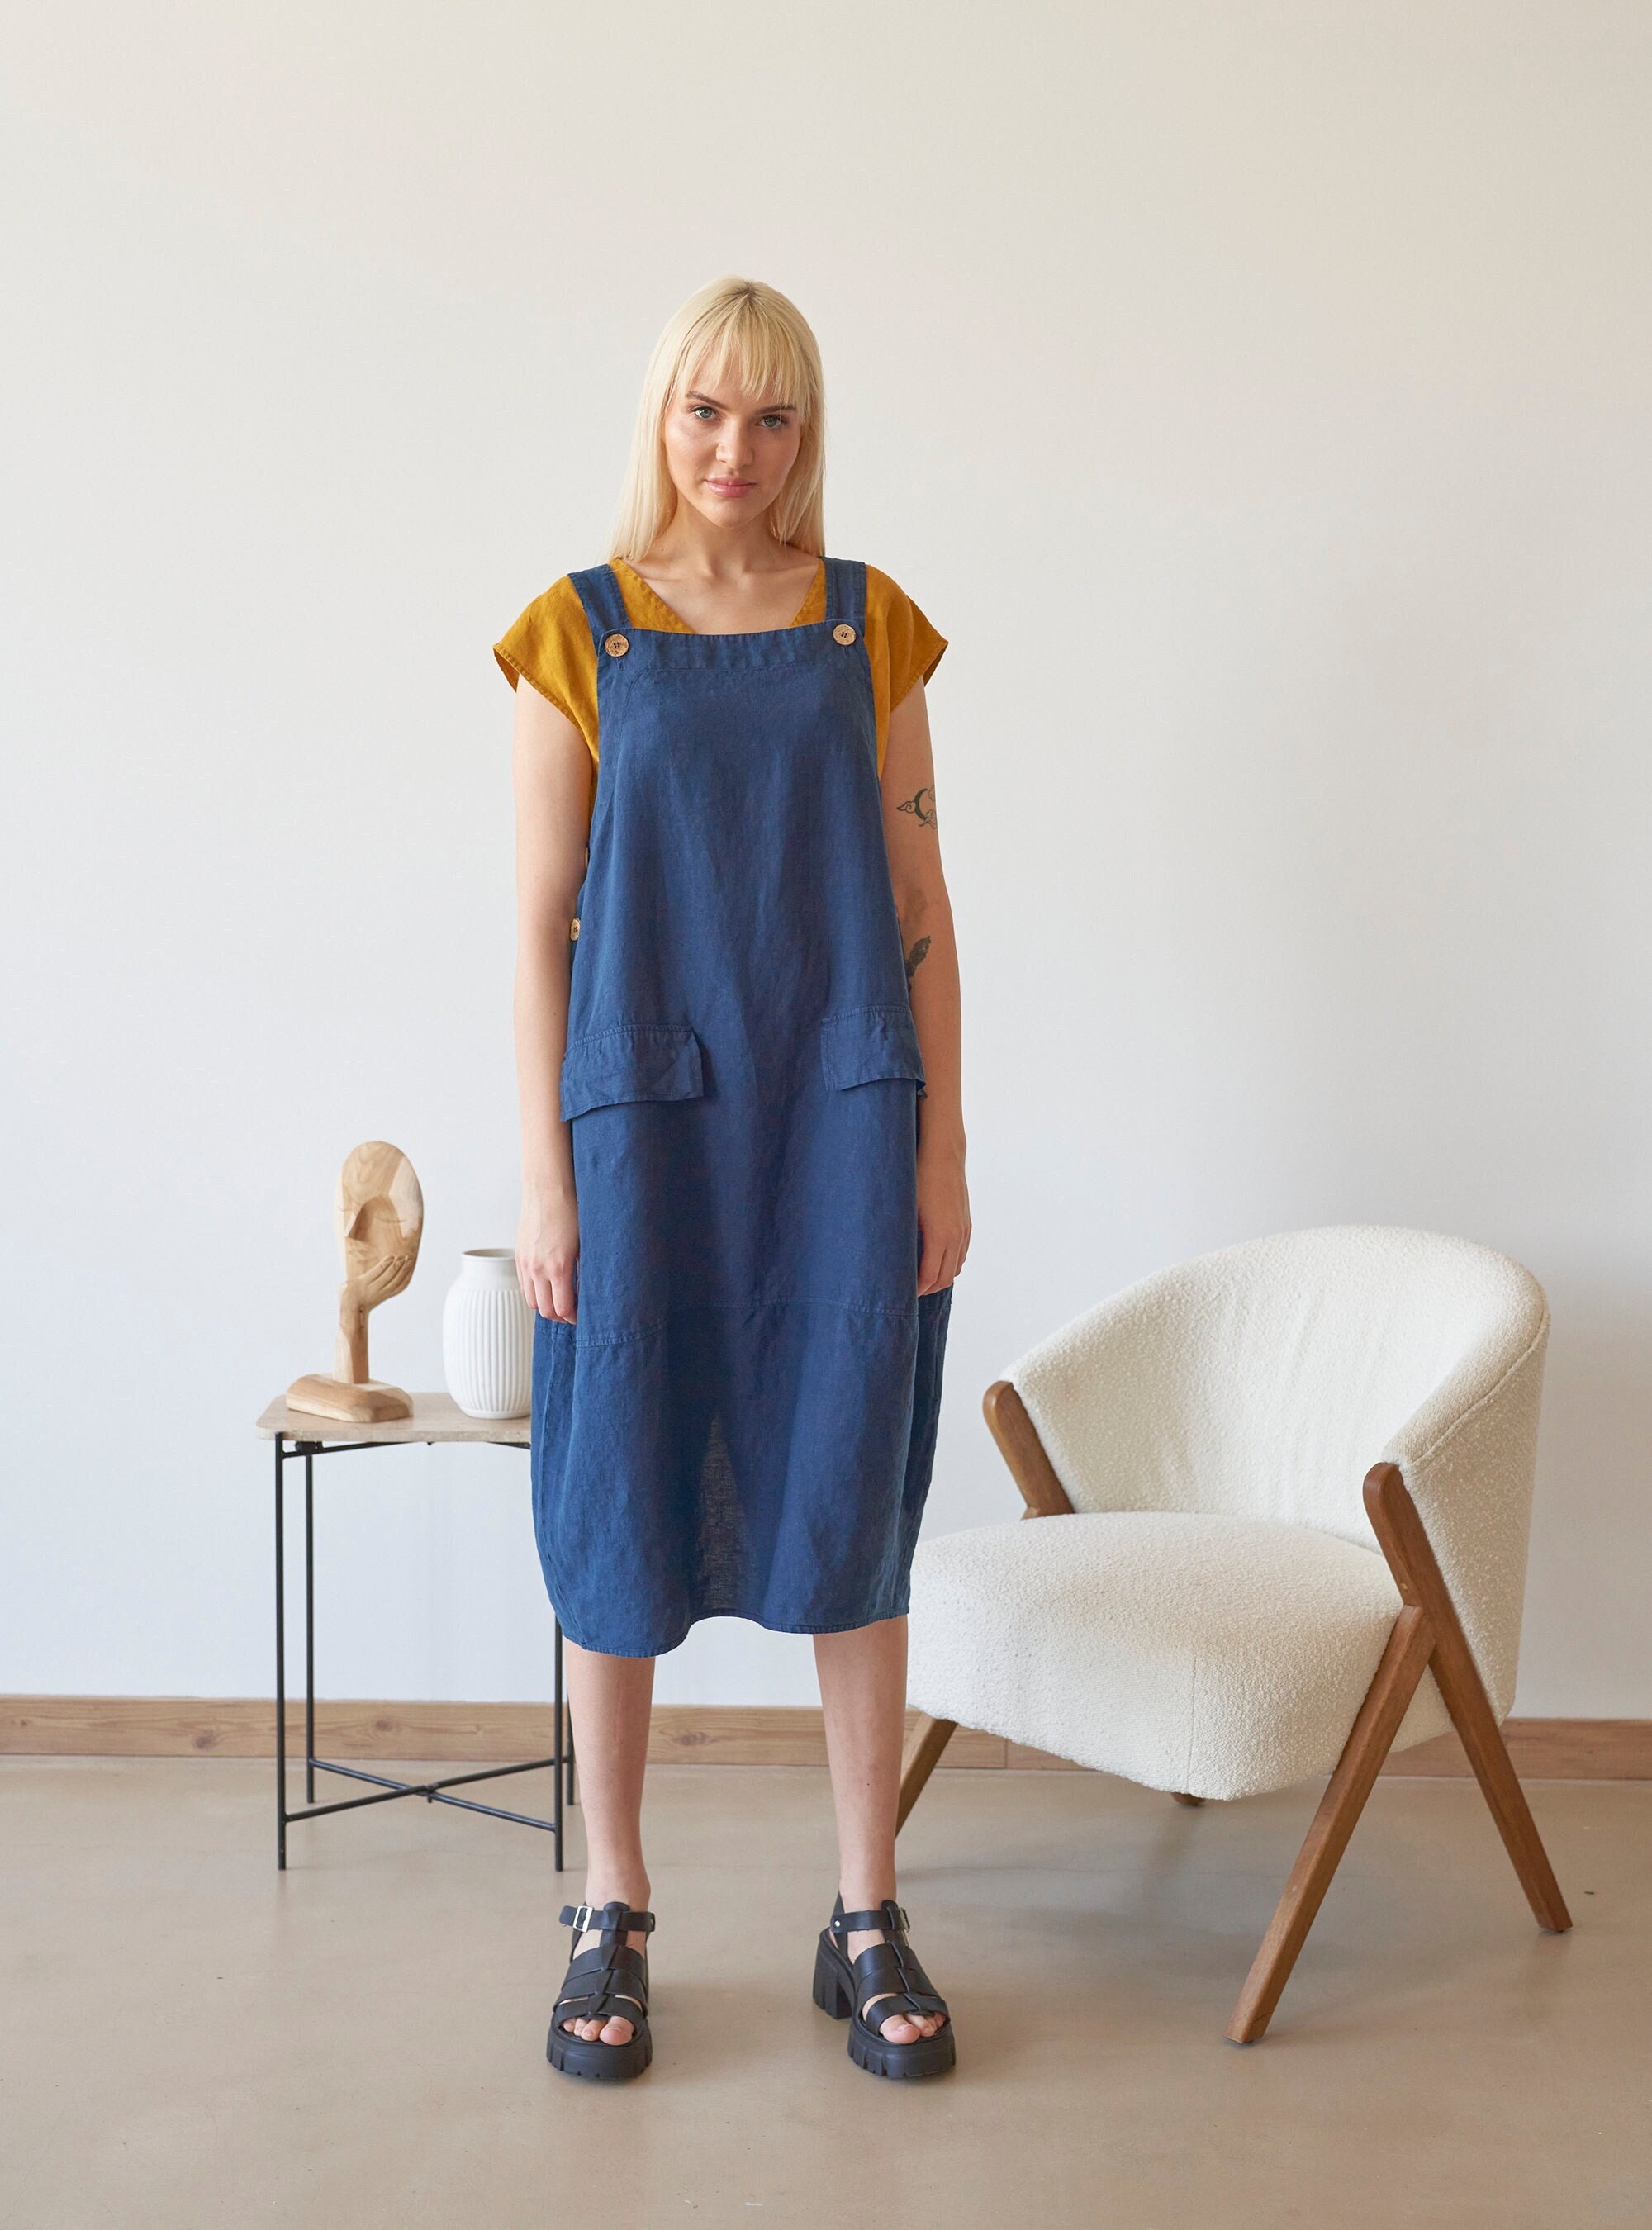 Replacement Overall Buckles No-sew Buttons Denim Overalls